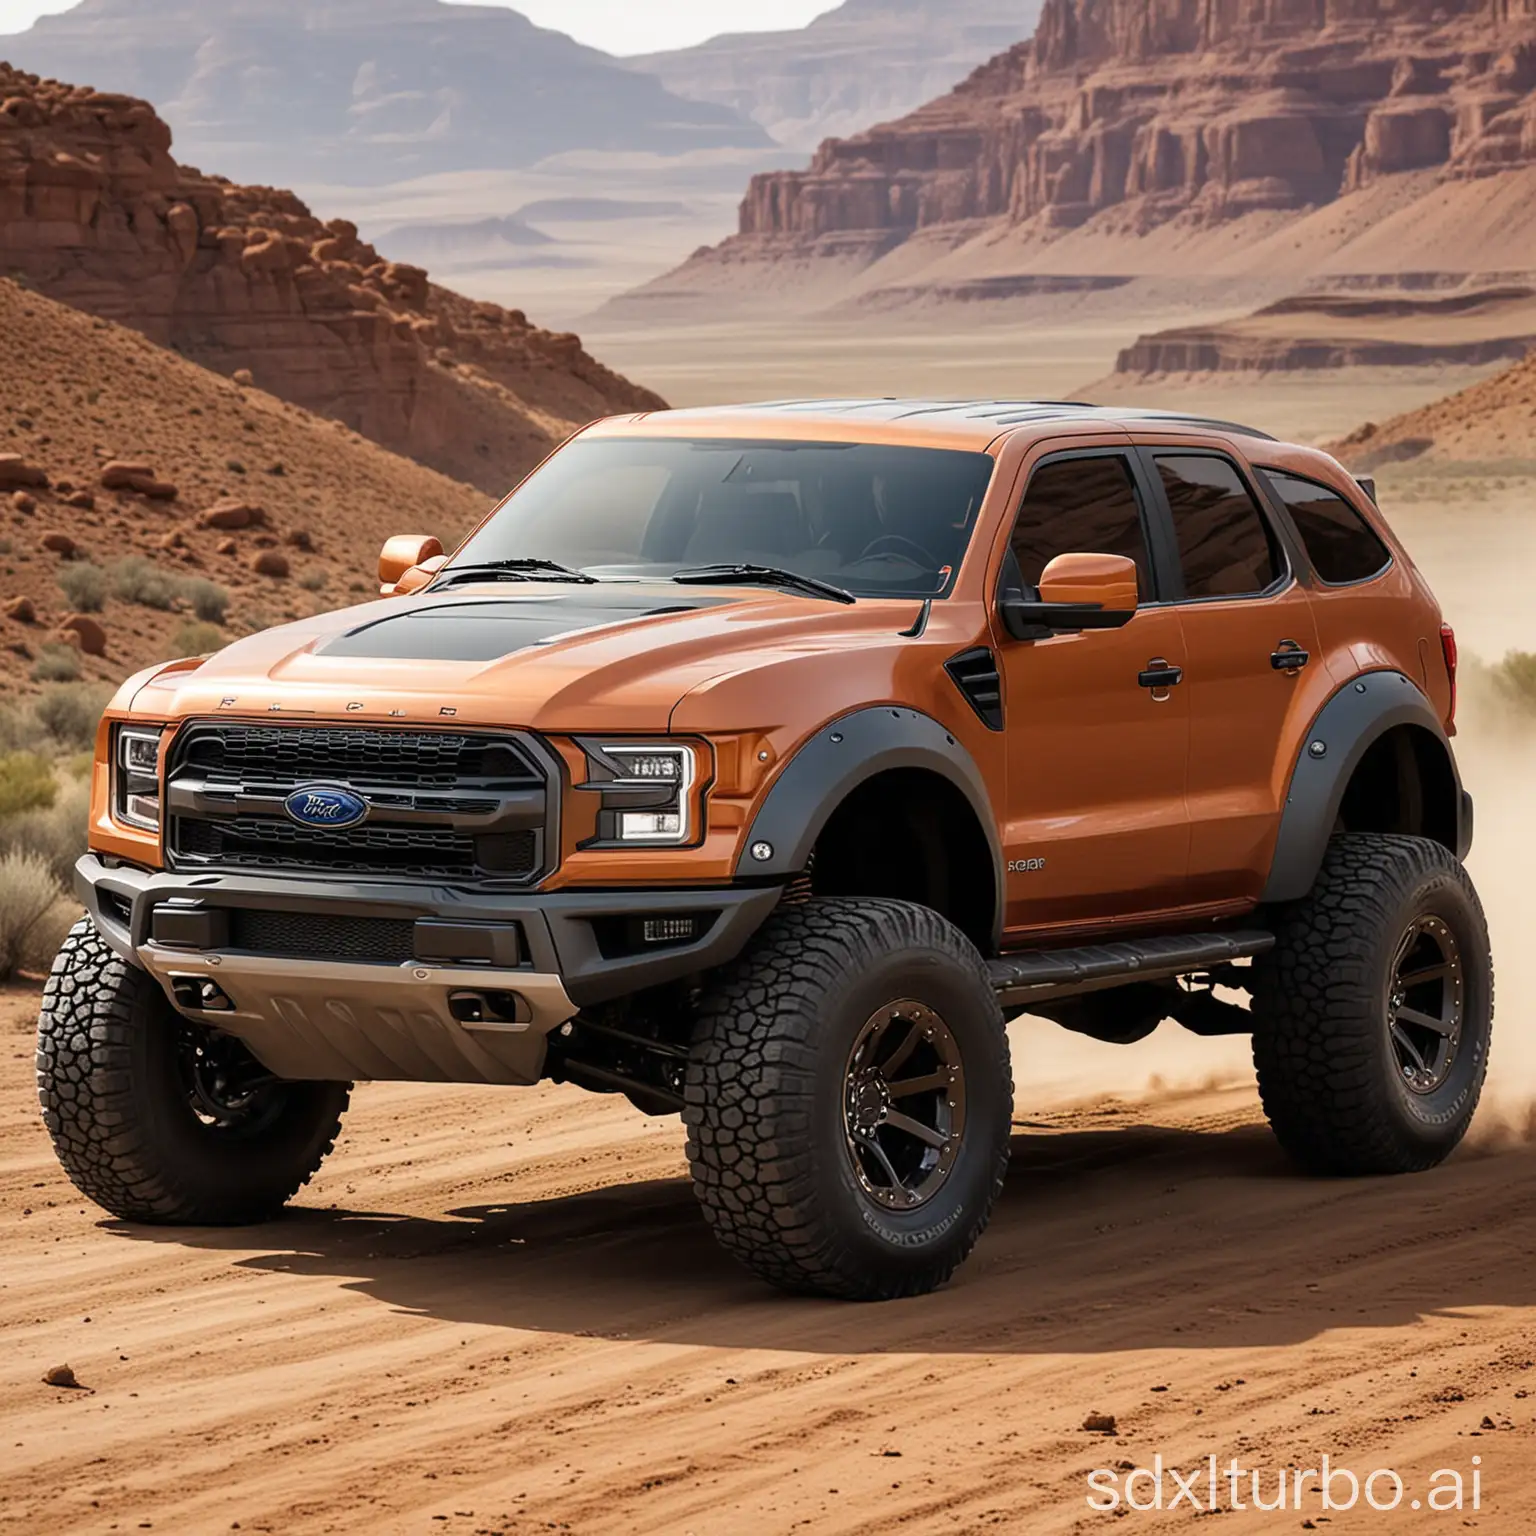 Ford-Sports-Car-and-OffRoad-Hybrid-Realistic-Style-Automotive-Concept